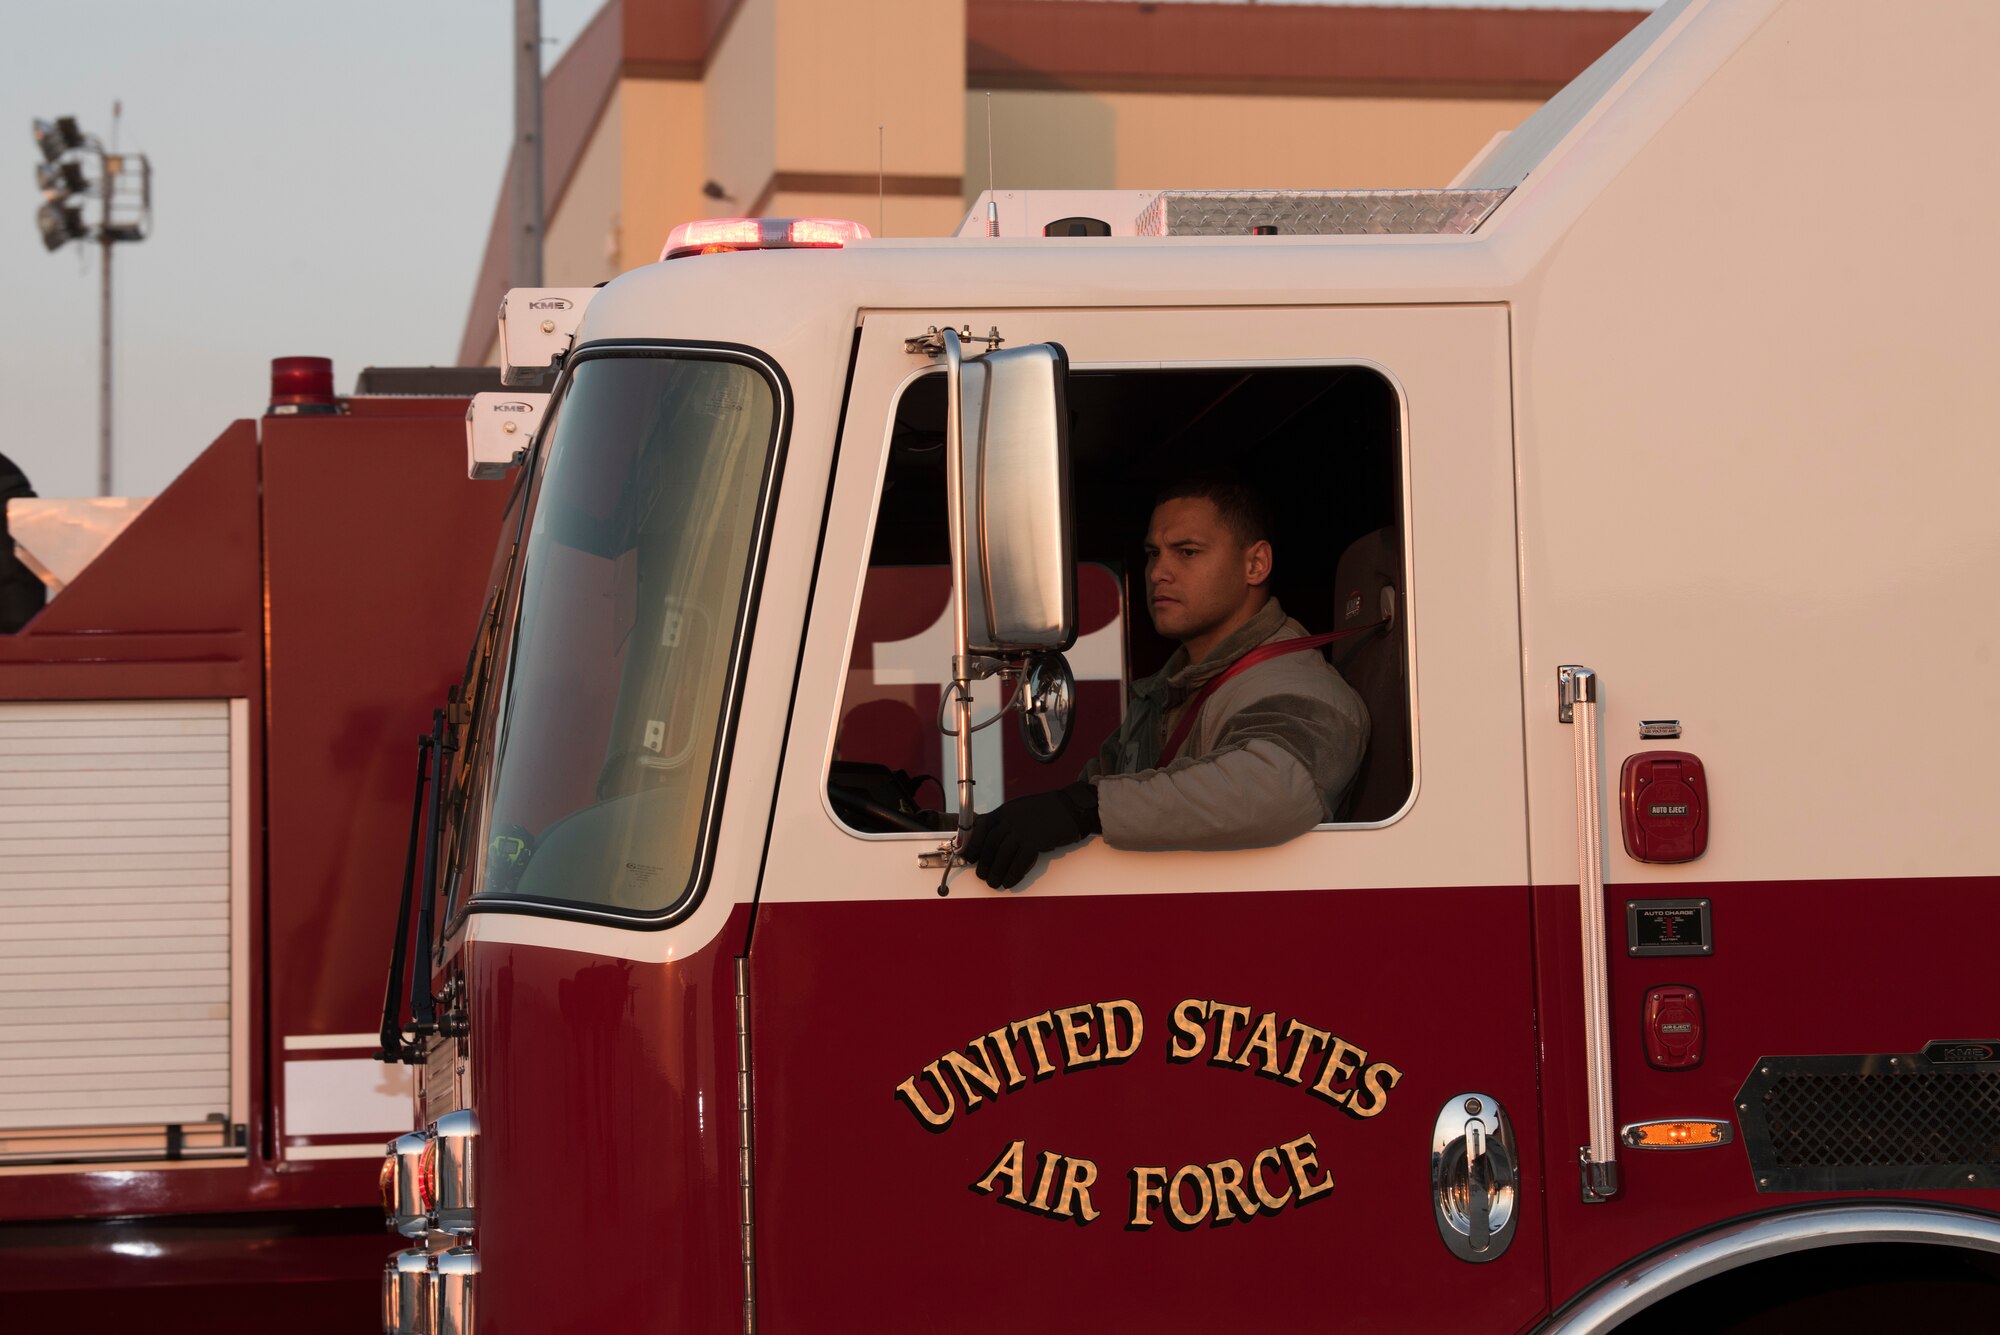 Senior Airman Juner Tenorio, 60th Civil Engineer Squadron Fire and Emergency Services flight driver operator, performs an operational check on a firetruck Oct. 29, 2019, at Travis Air Force Base, California. With the start of every shift, the FES flight conducts inspections on more than 1,000 items including vehicles, protective equipment and hardware.  (U.S. Air Force photo by Tech. Sgt. James Hodgman)